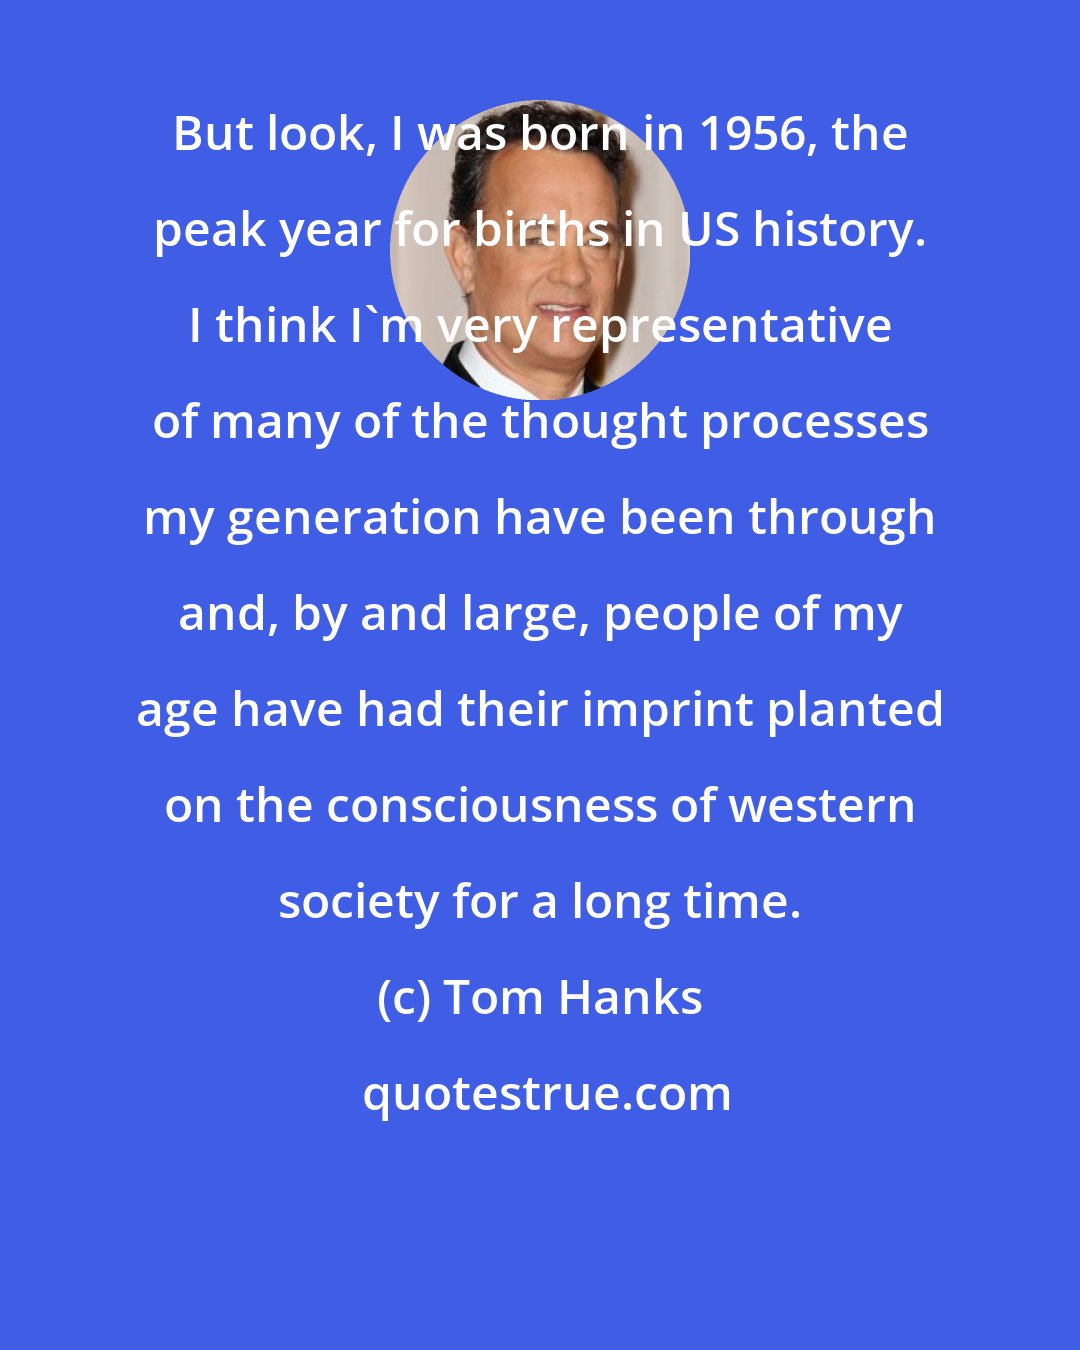 Tom Hanks: But look, I was born in 1956, the peak year for births in US history. I think I'm very representative of many of the thought processes my generation have been through and, by and large, people of my age have had their imprint planted on the consciousness of western society for a long time.